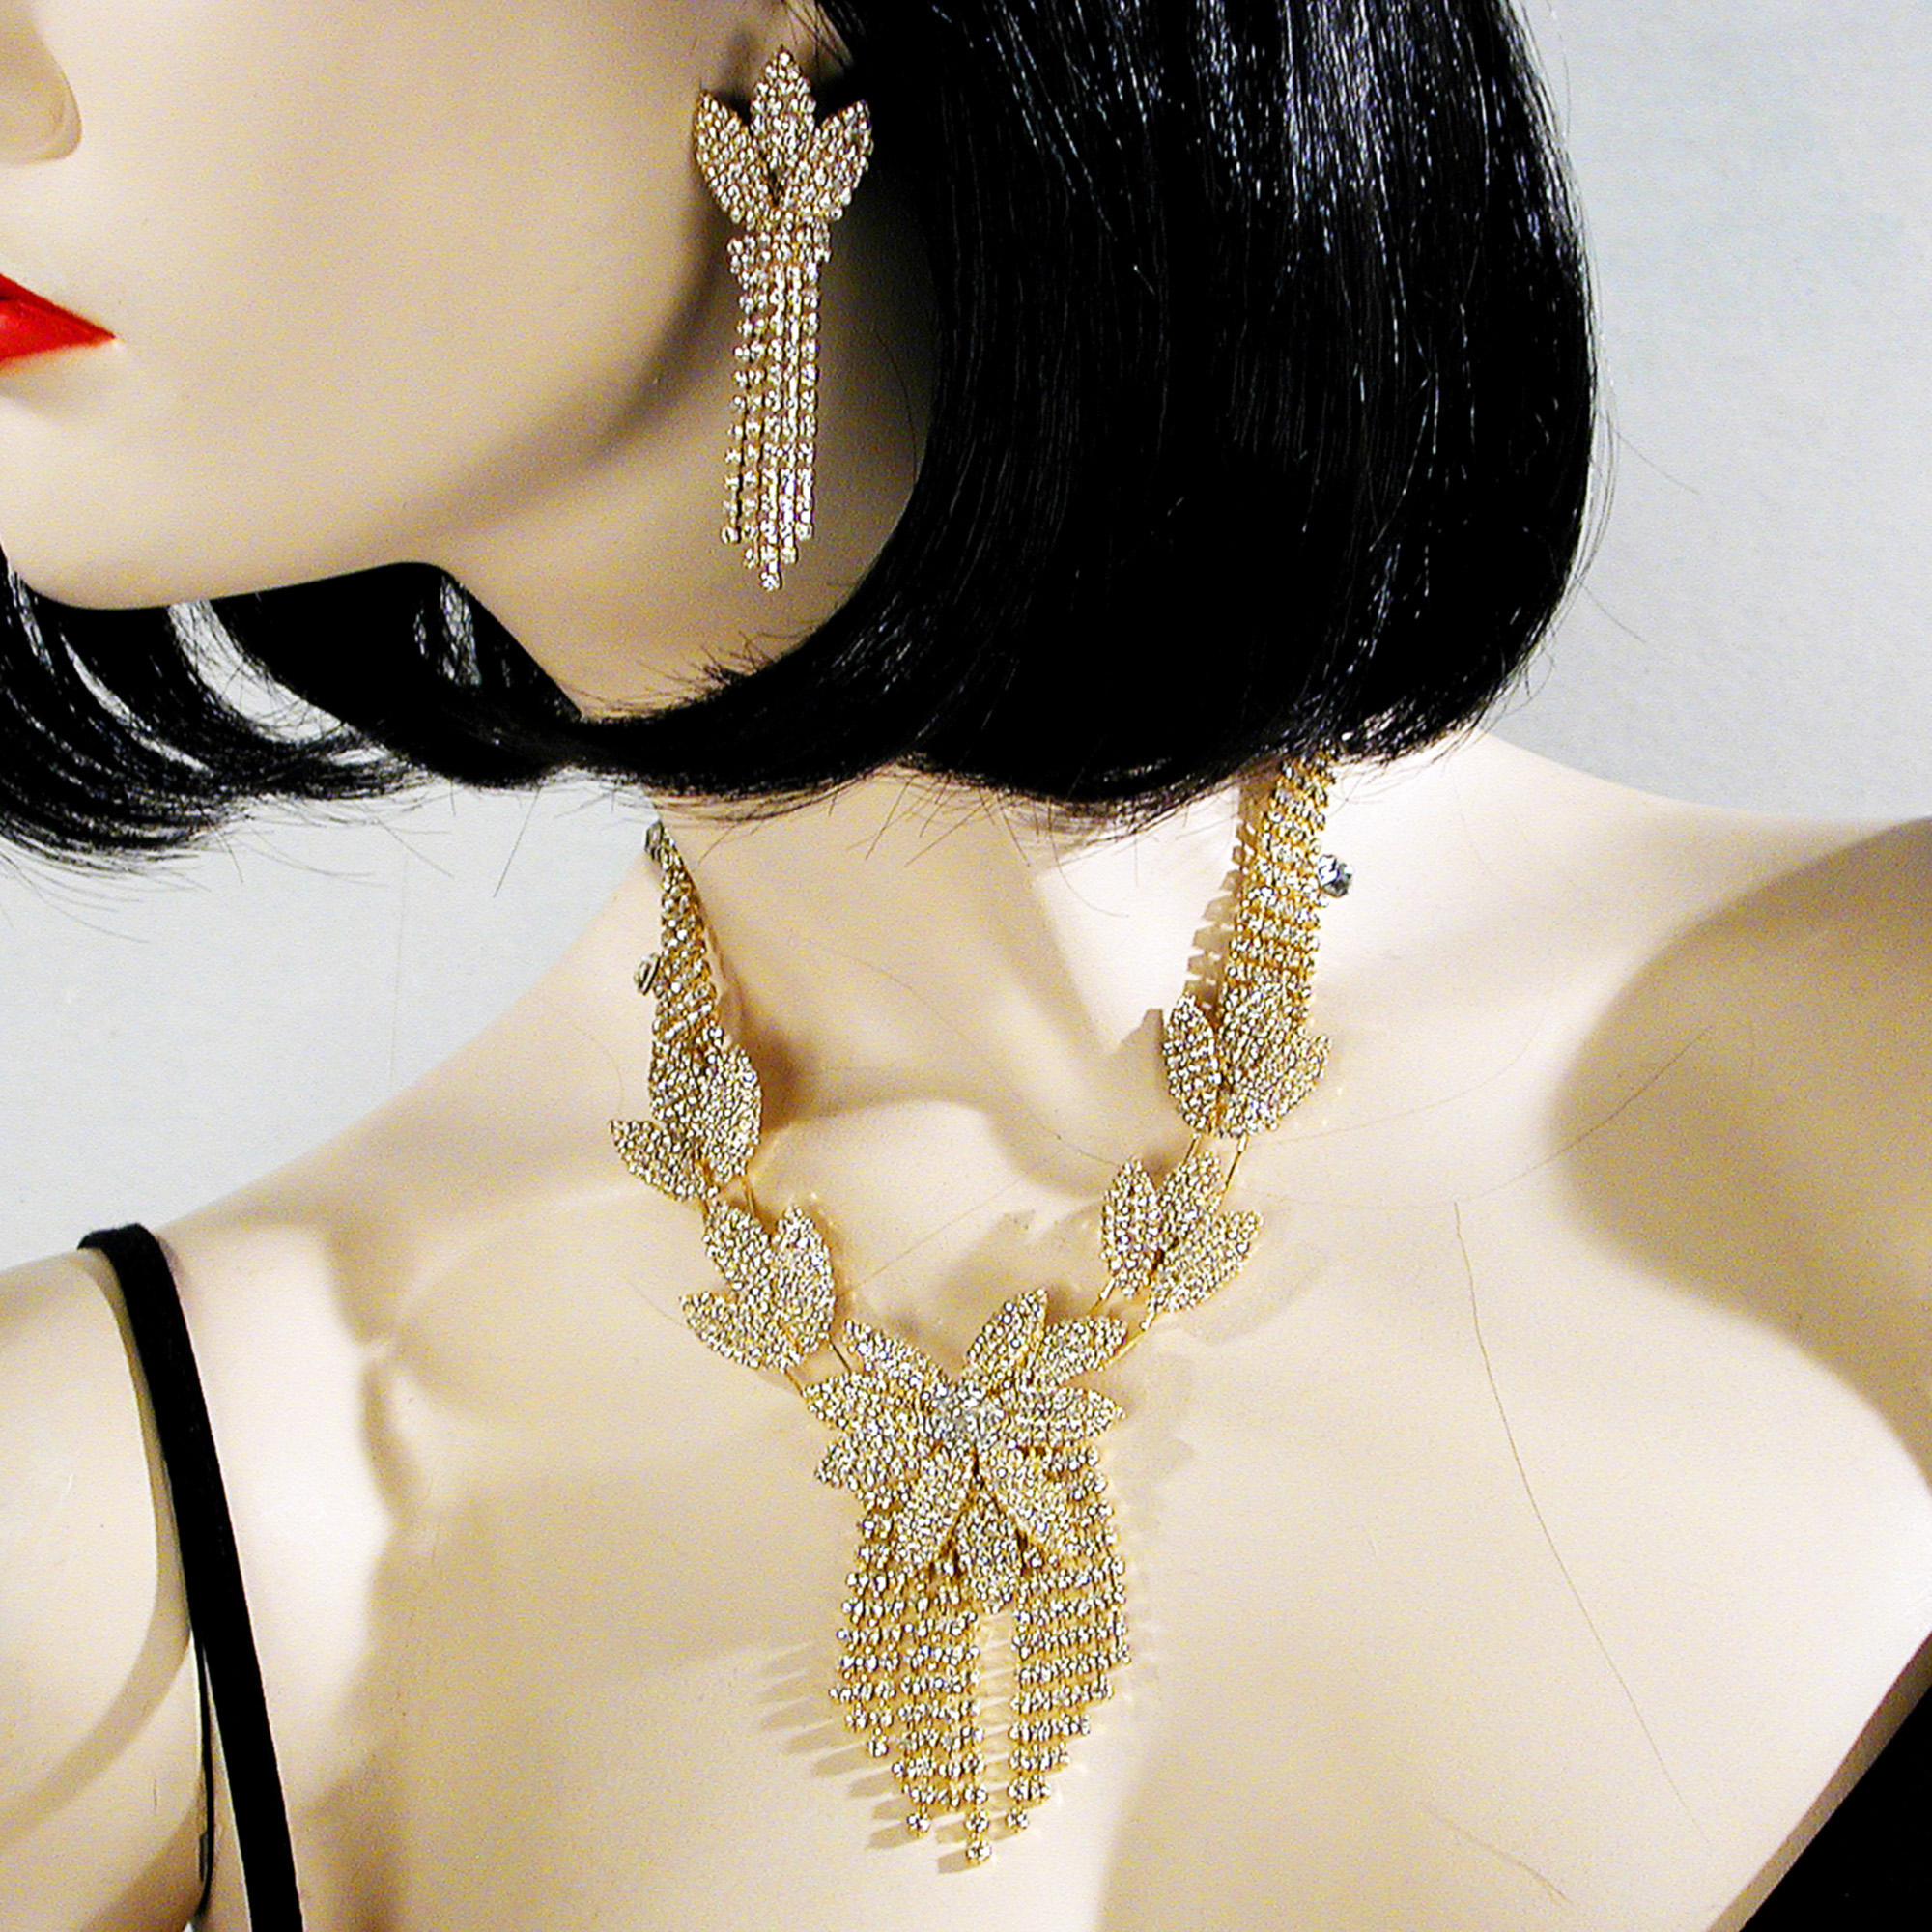 Sparkling Gold and Crystal Rhinestone Necklace Set, a fashion accessorie - Evening Elegance